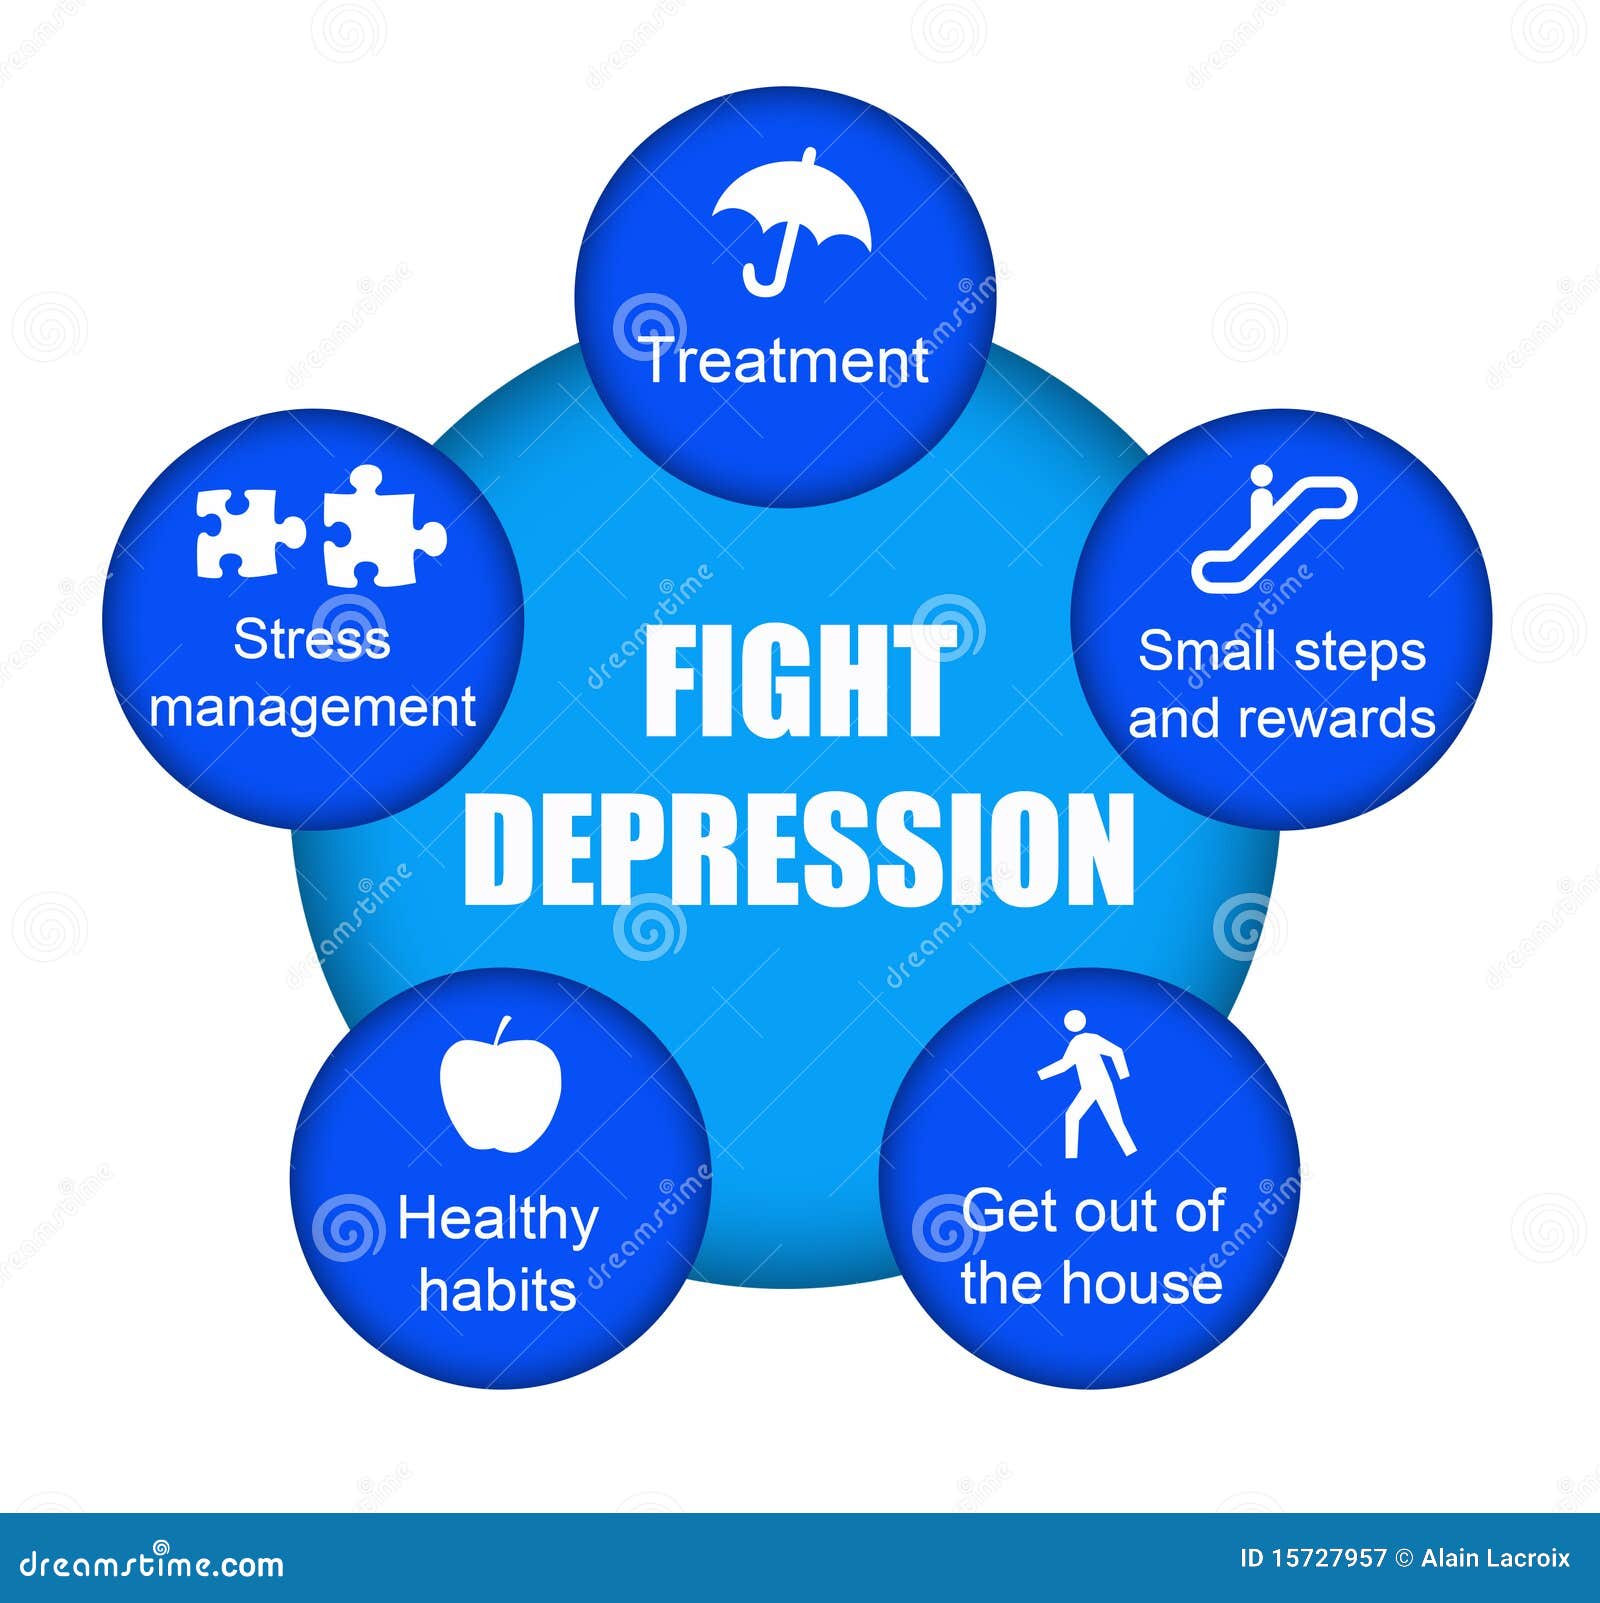 free clipart images depression - photo #37